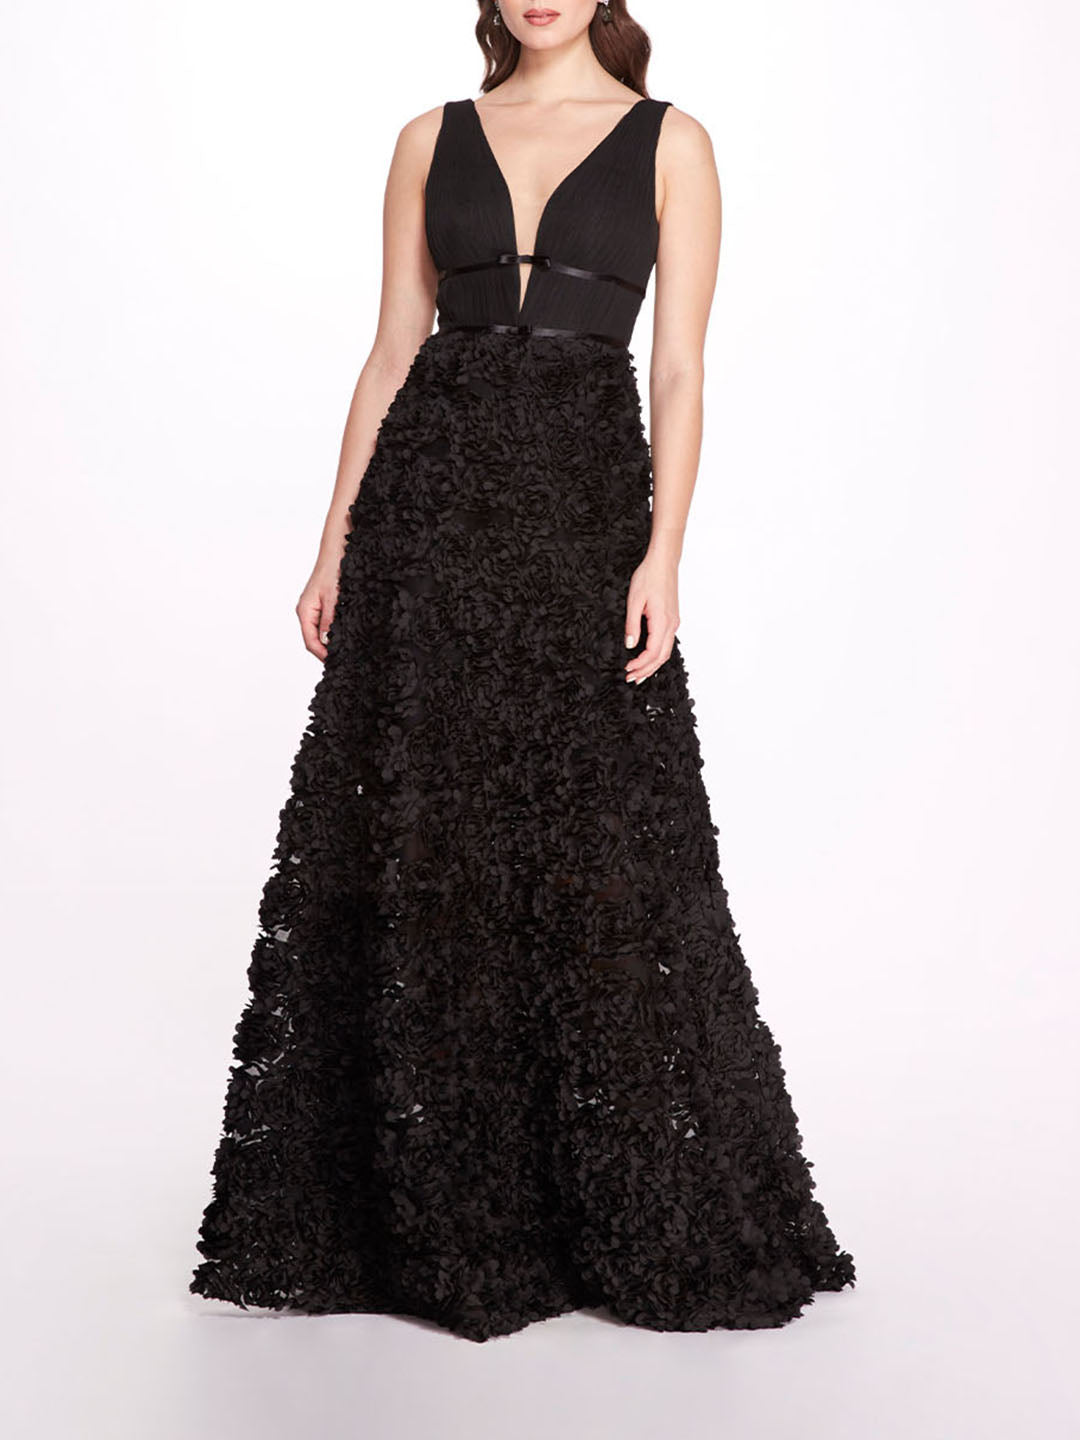 Plunging V-Neck Ball Gown | Marchesa